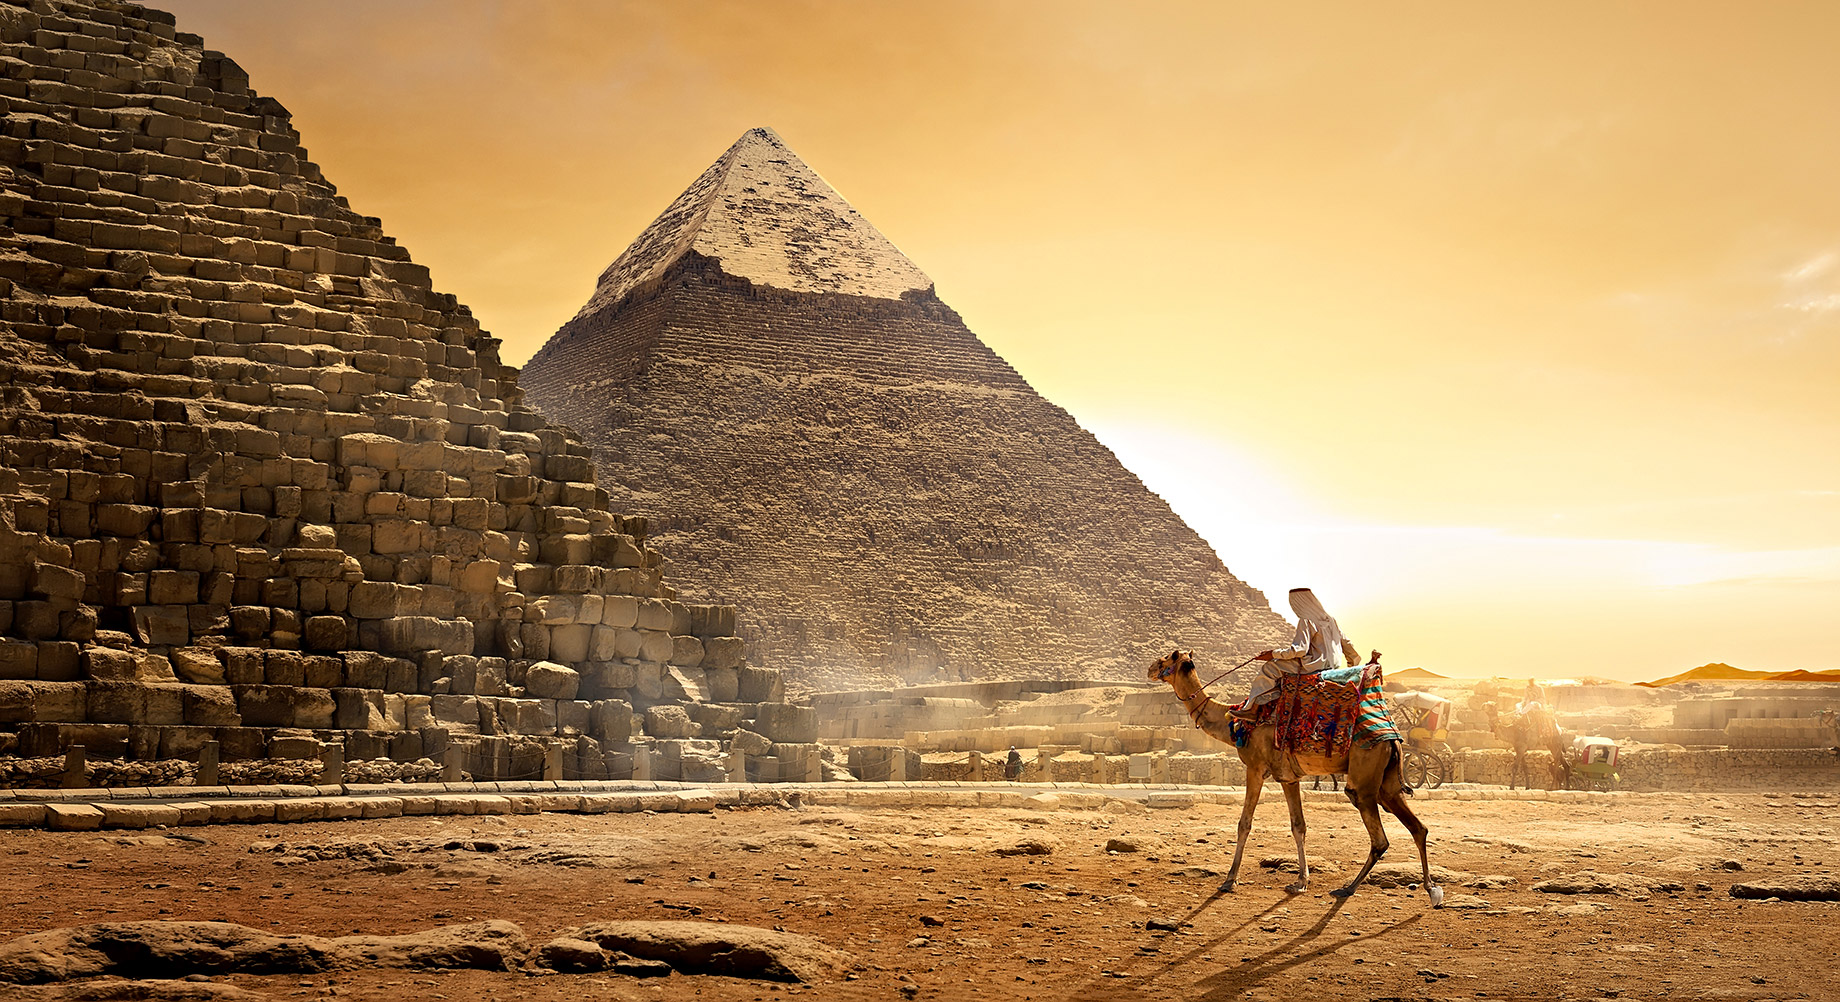 Digital Nomad Riding a Camel at The Great Pyramids of Giza, Egypt